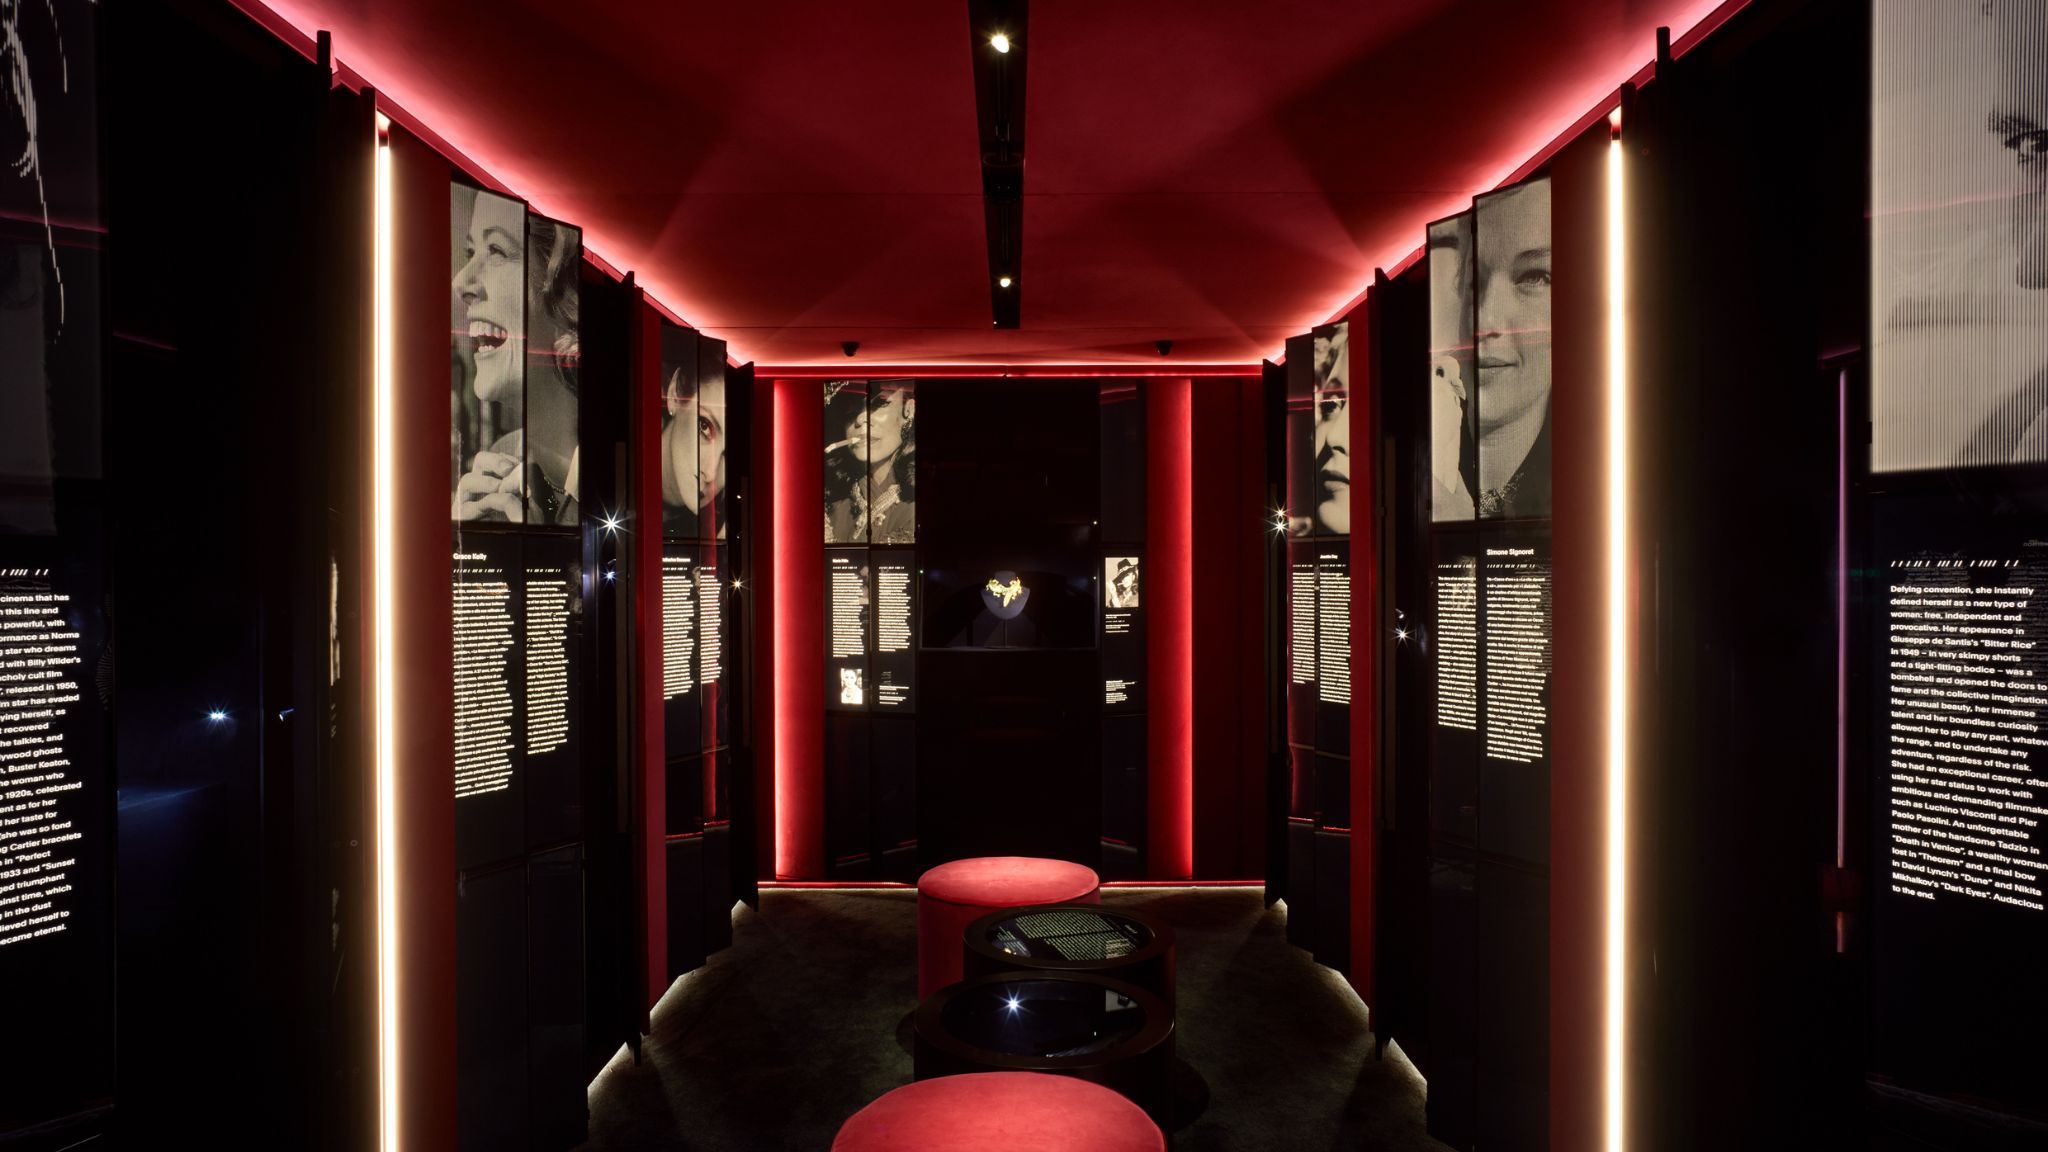 CARTIER AND CINEMA AT THE VENICE INTERNATIONAL FILM FESTIVAL